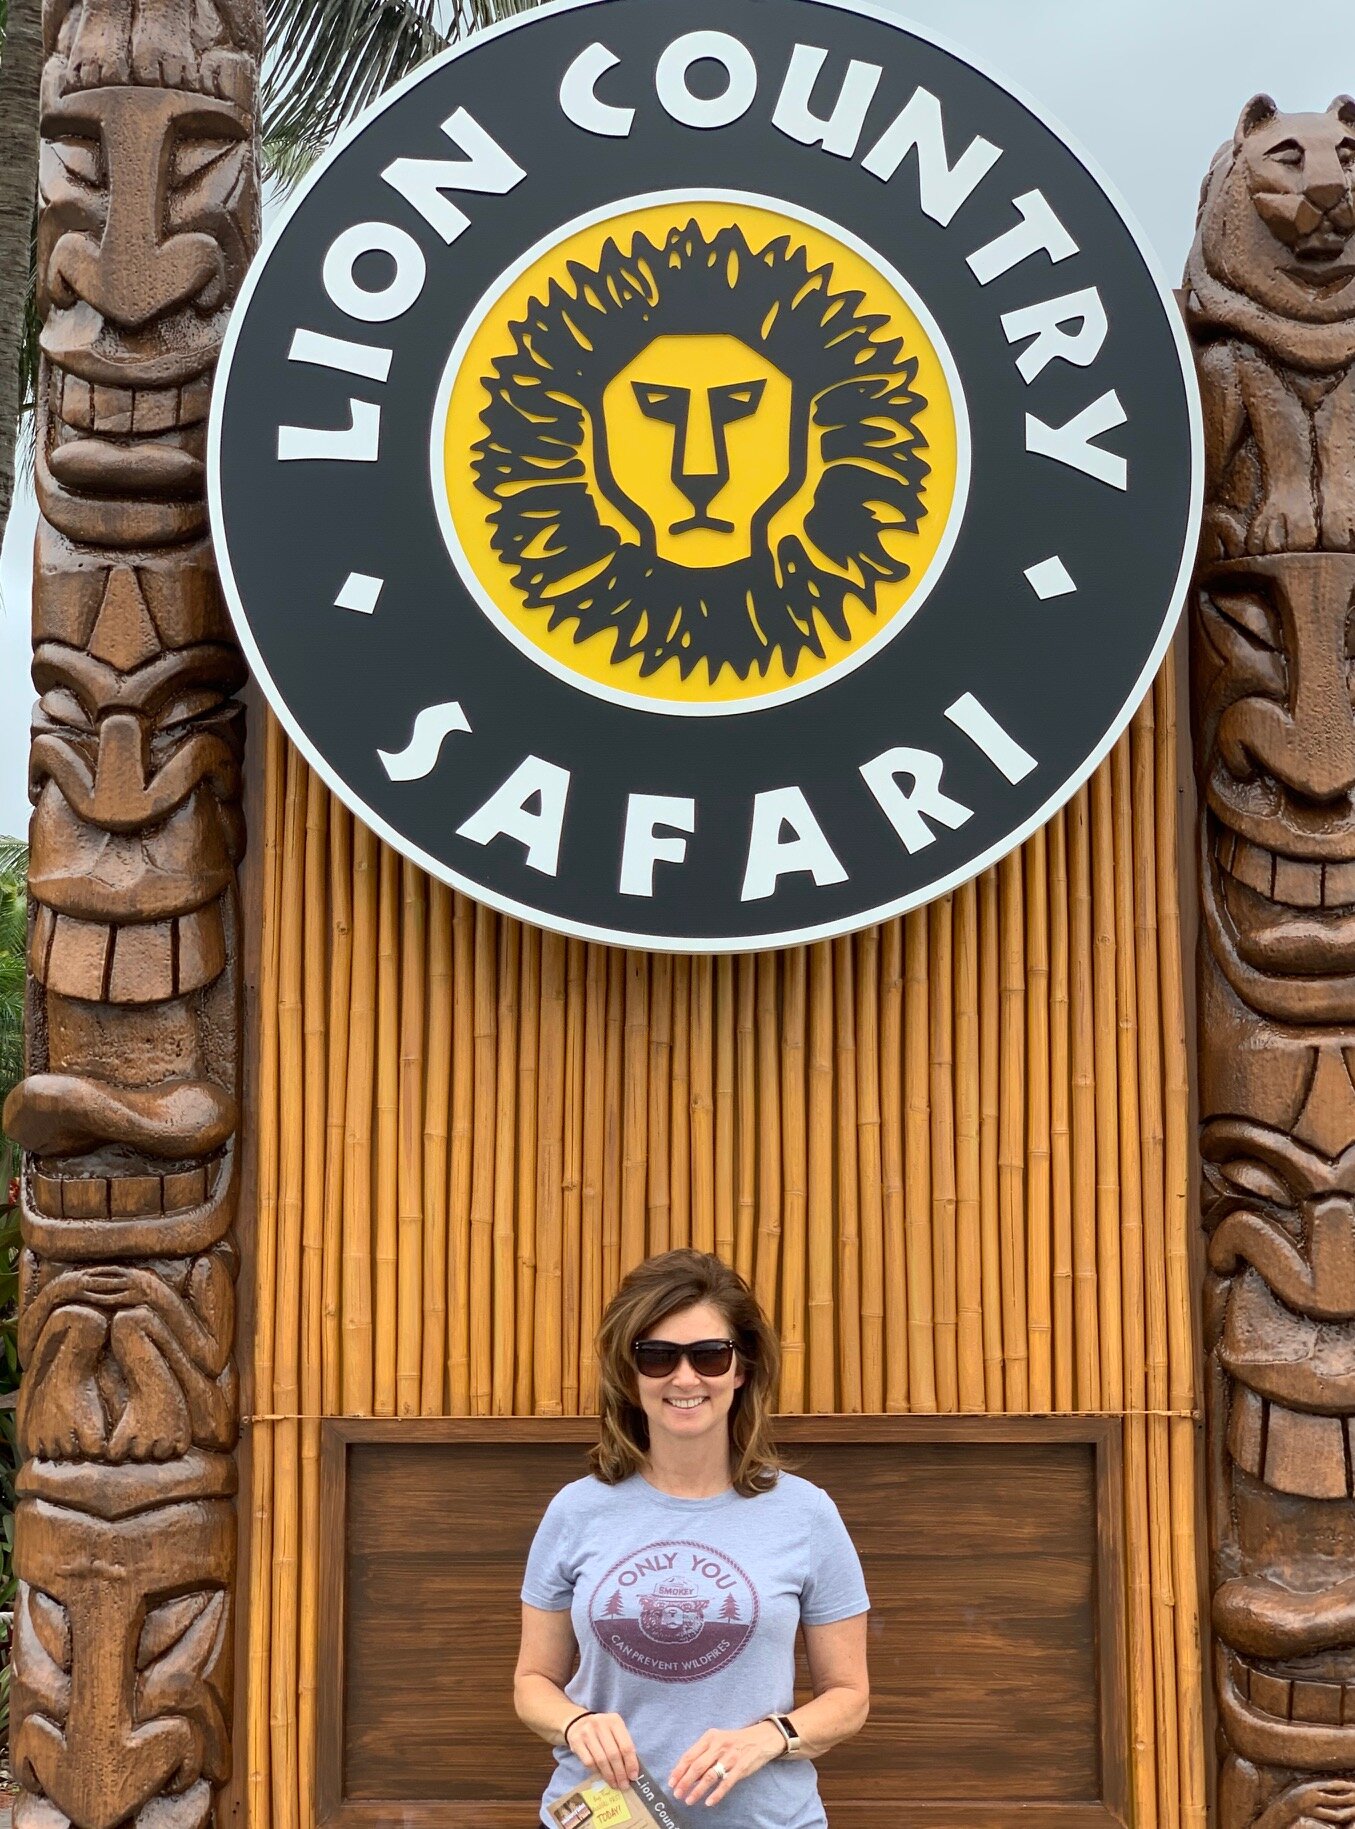  Entering the walking portion of Lion Country Safari in Loxahatchee, Florida.  